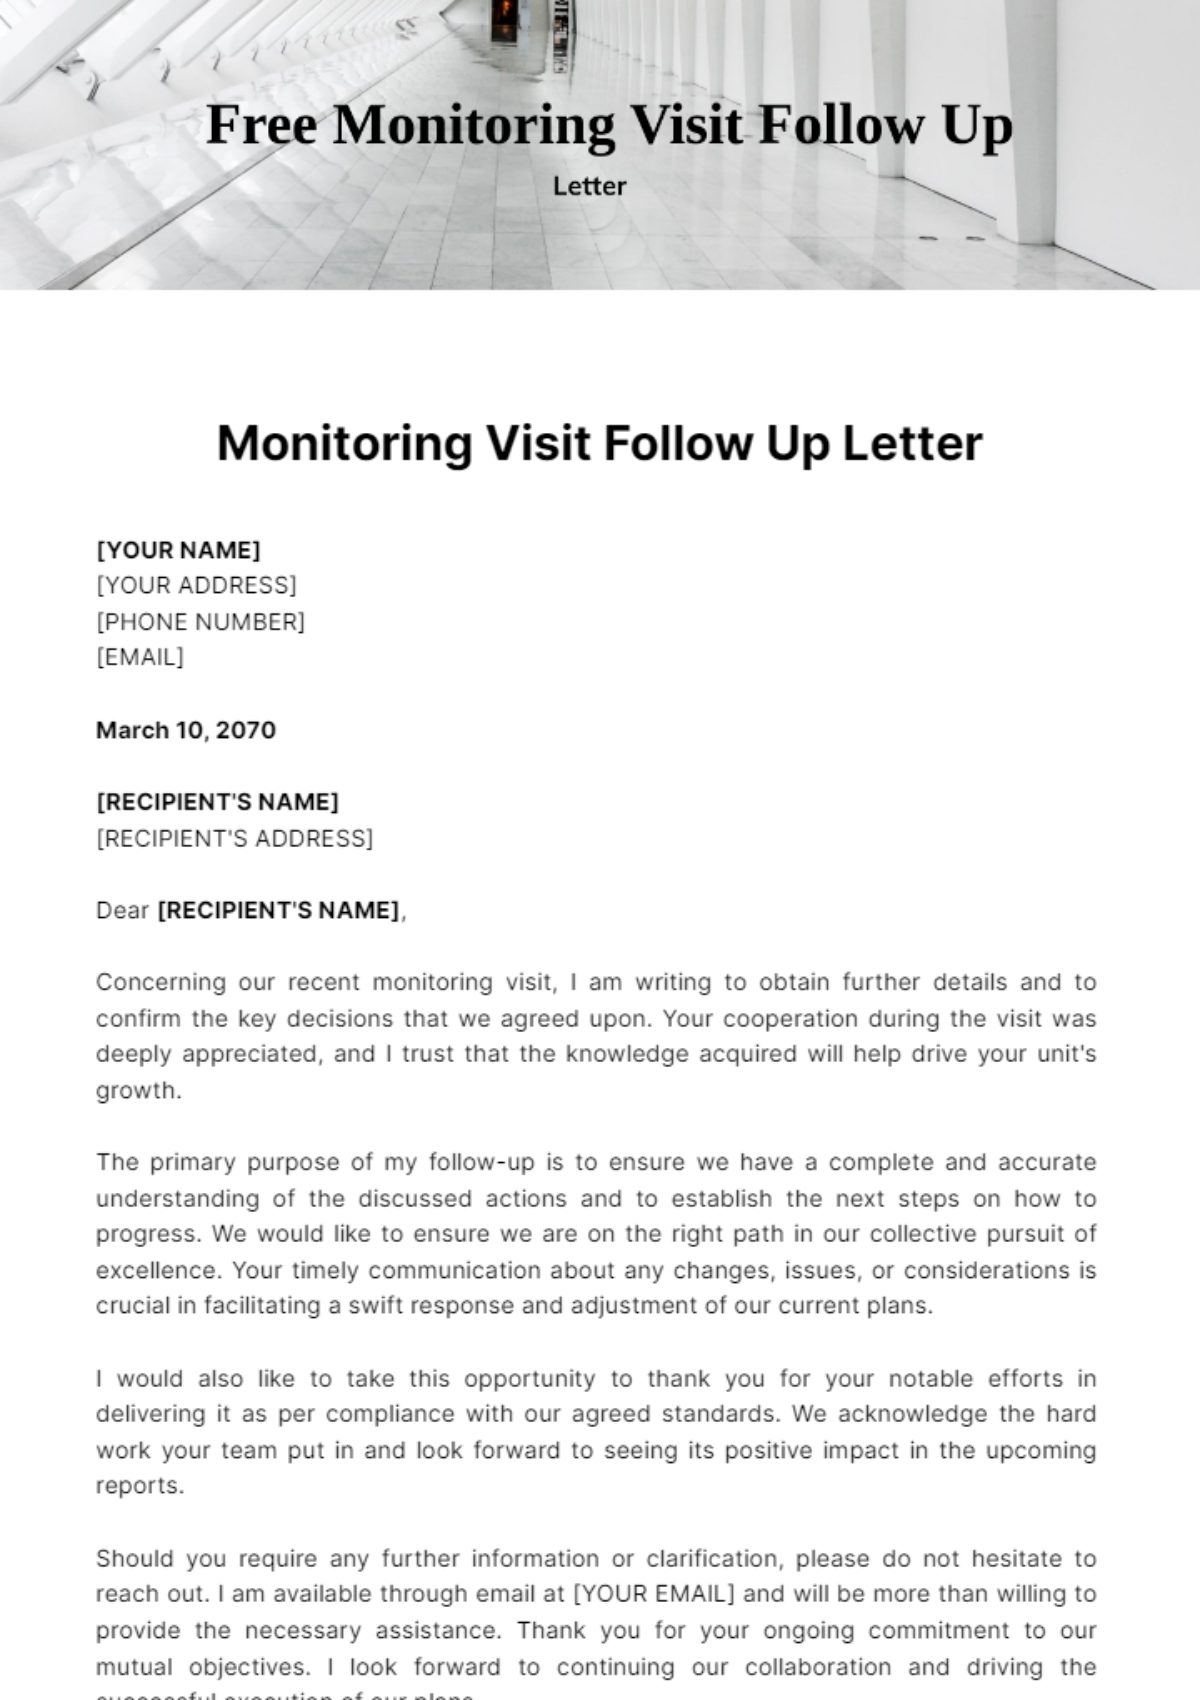 Free Monitoring Visit Follow Up Letter Template